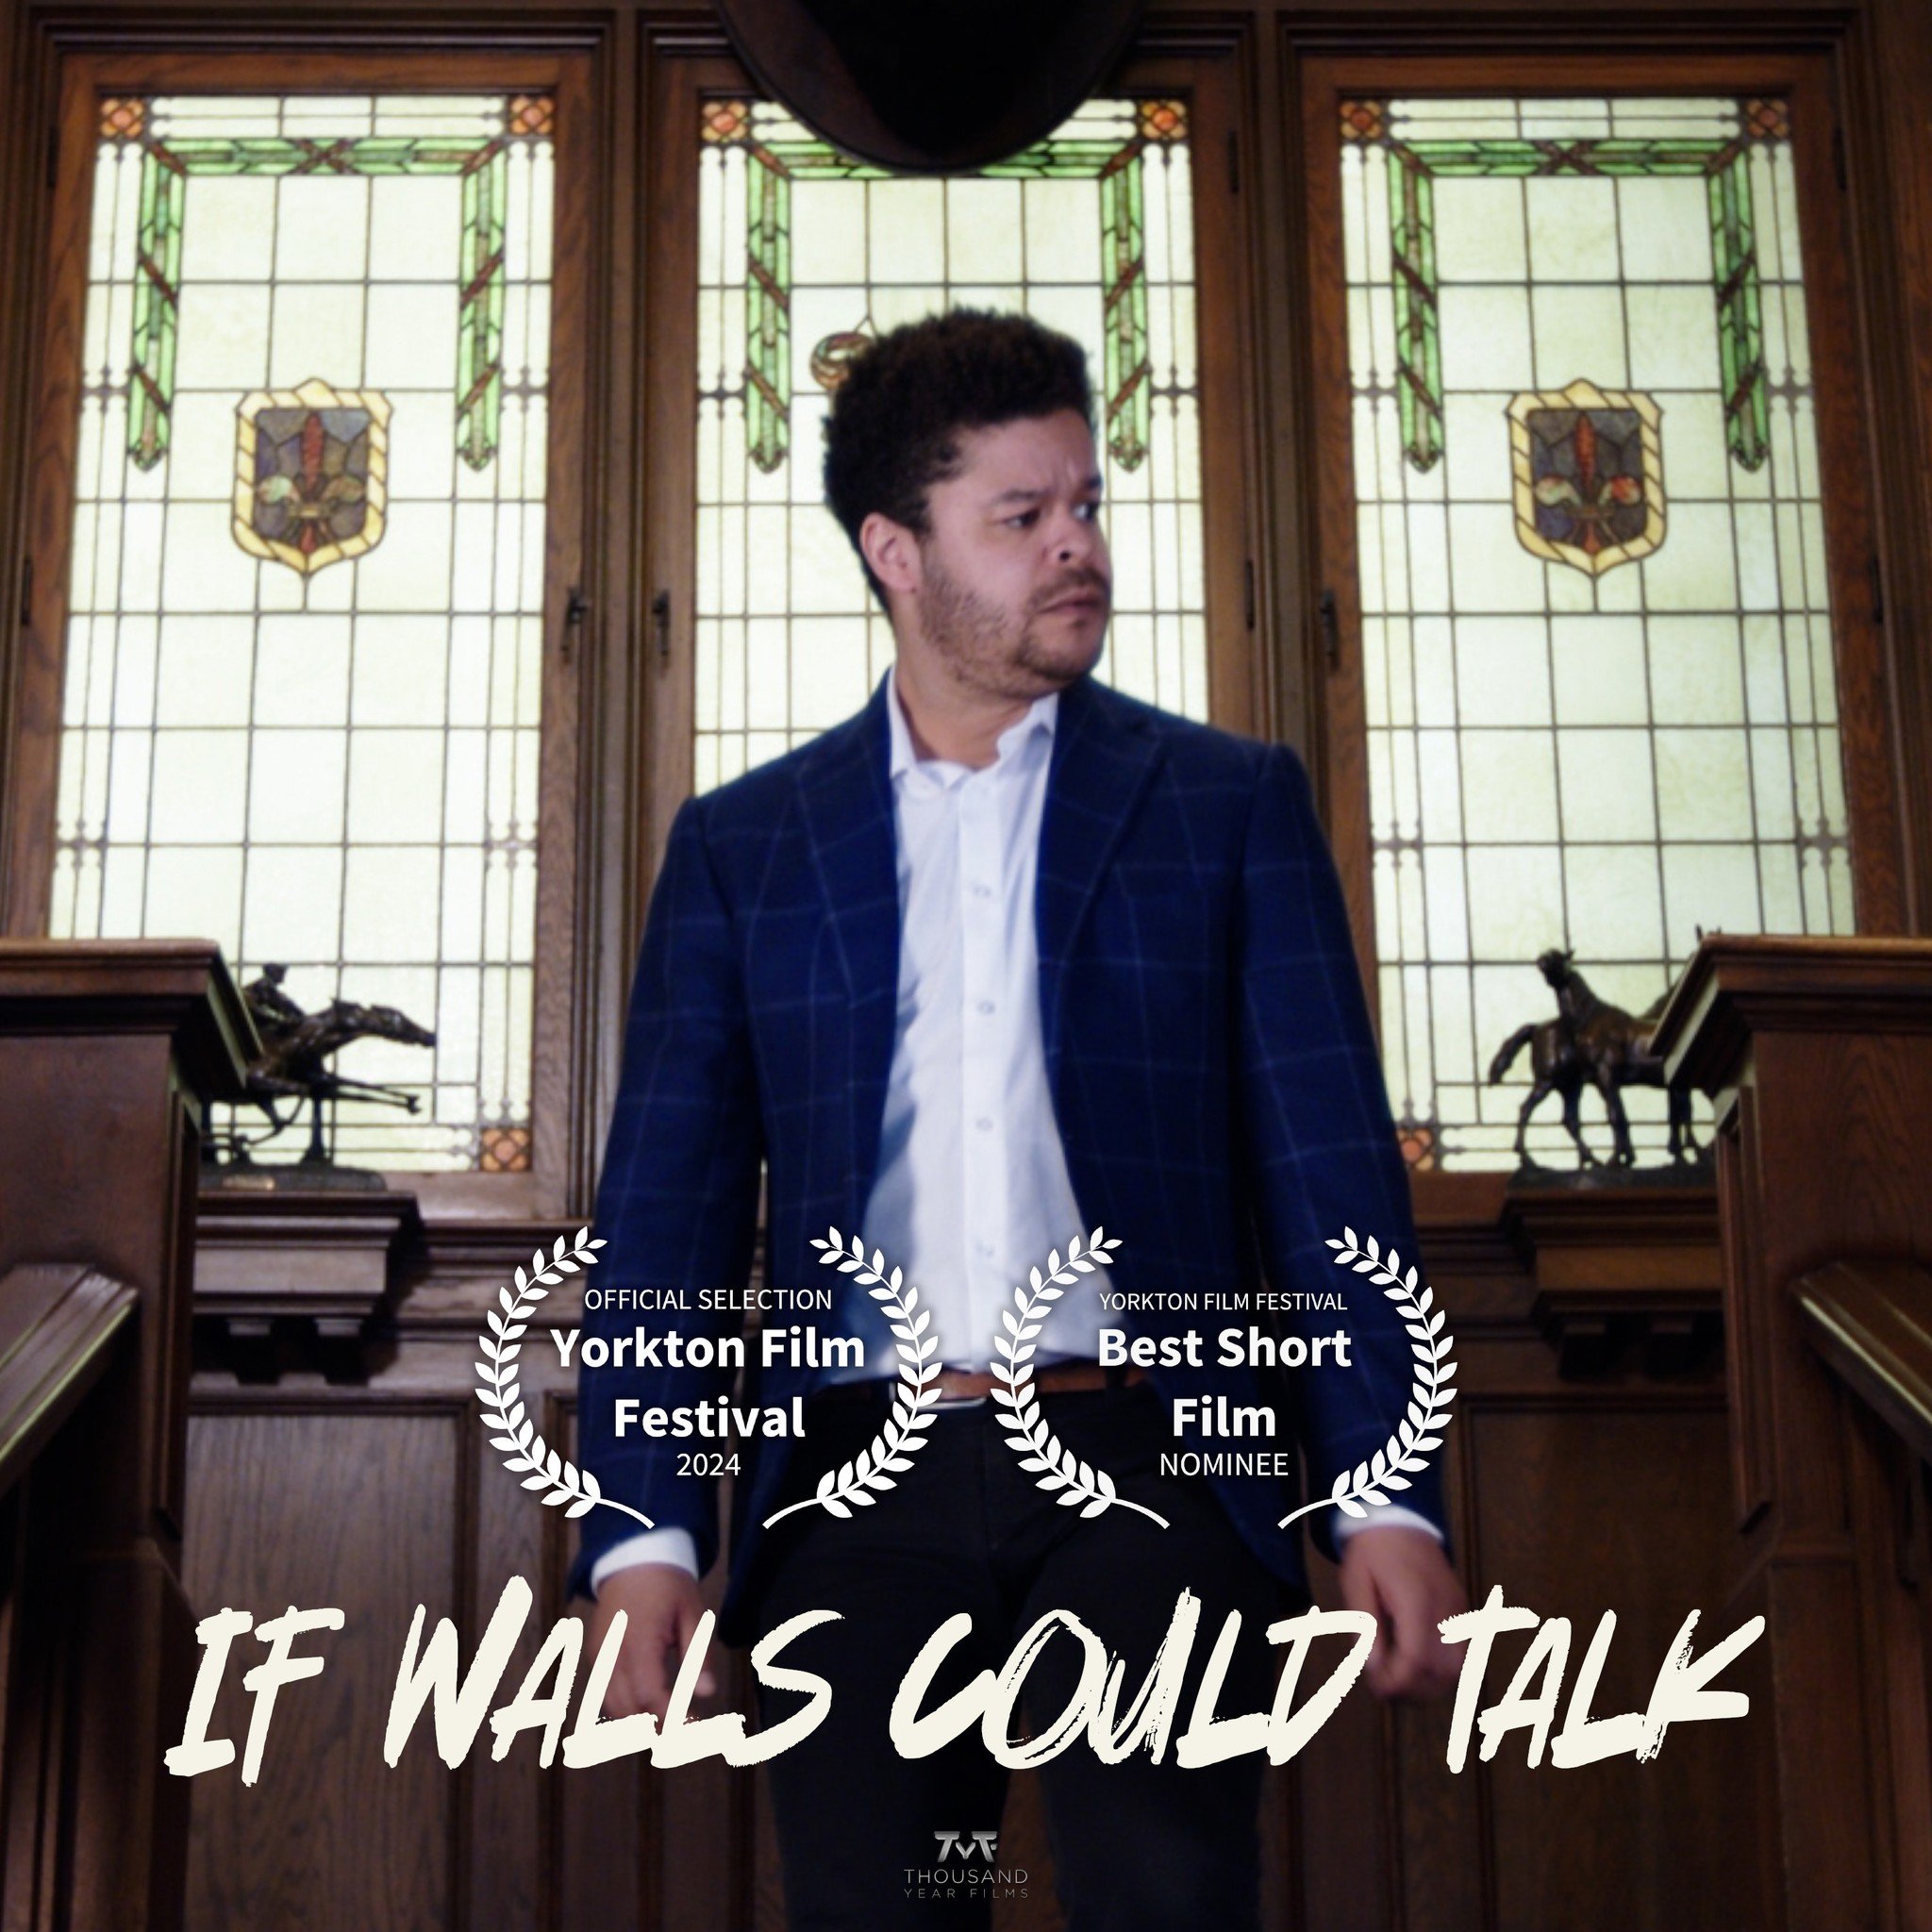 &quot;If Walls Could Talk&quot; is an official selection of @yorktonfilm @Yorkton Film Festival screening this May 23-25, 2024. We are also nominated for Best Short Film! We are extremely honored!

#shortfilm #yycfim #yorktonfilmfestival #ifwallscoul